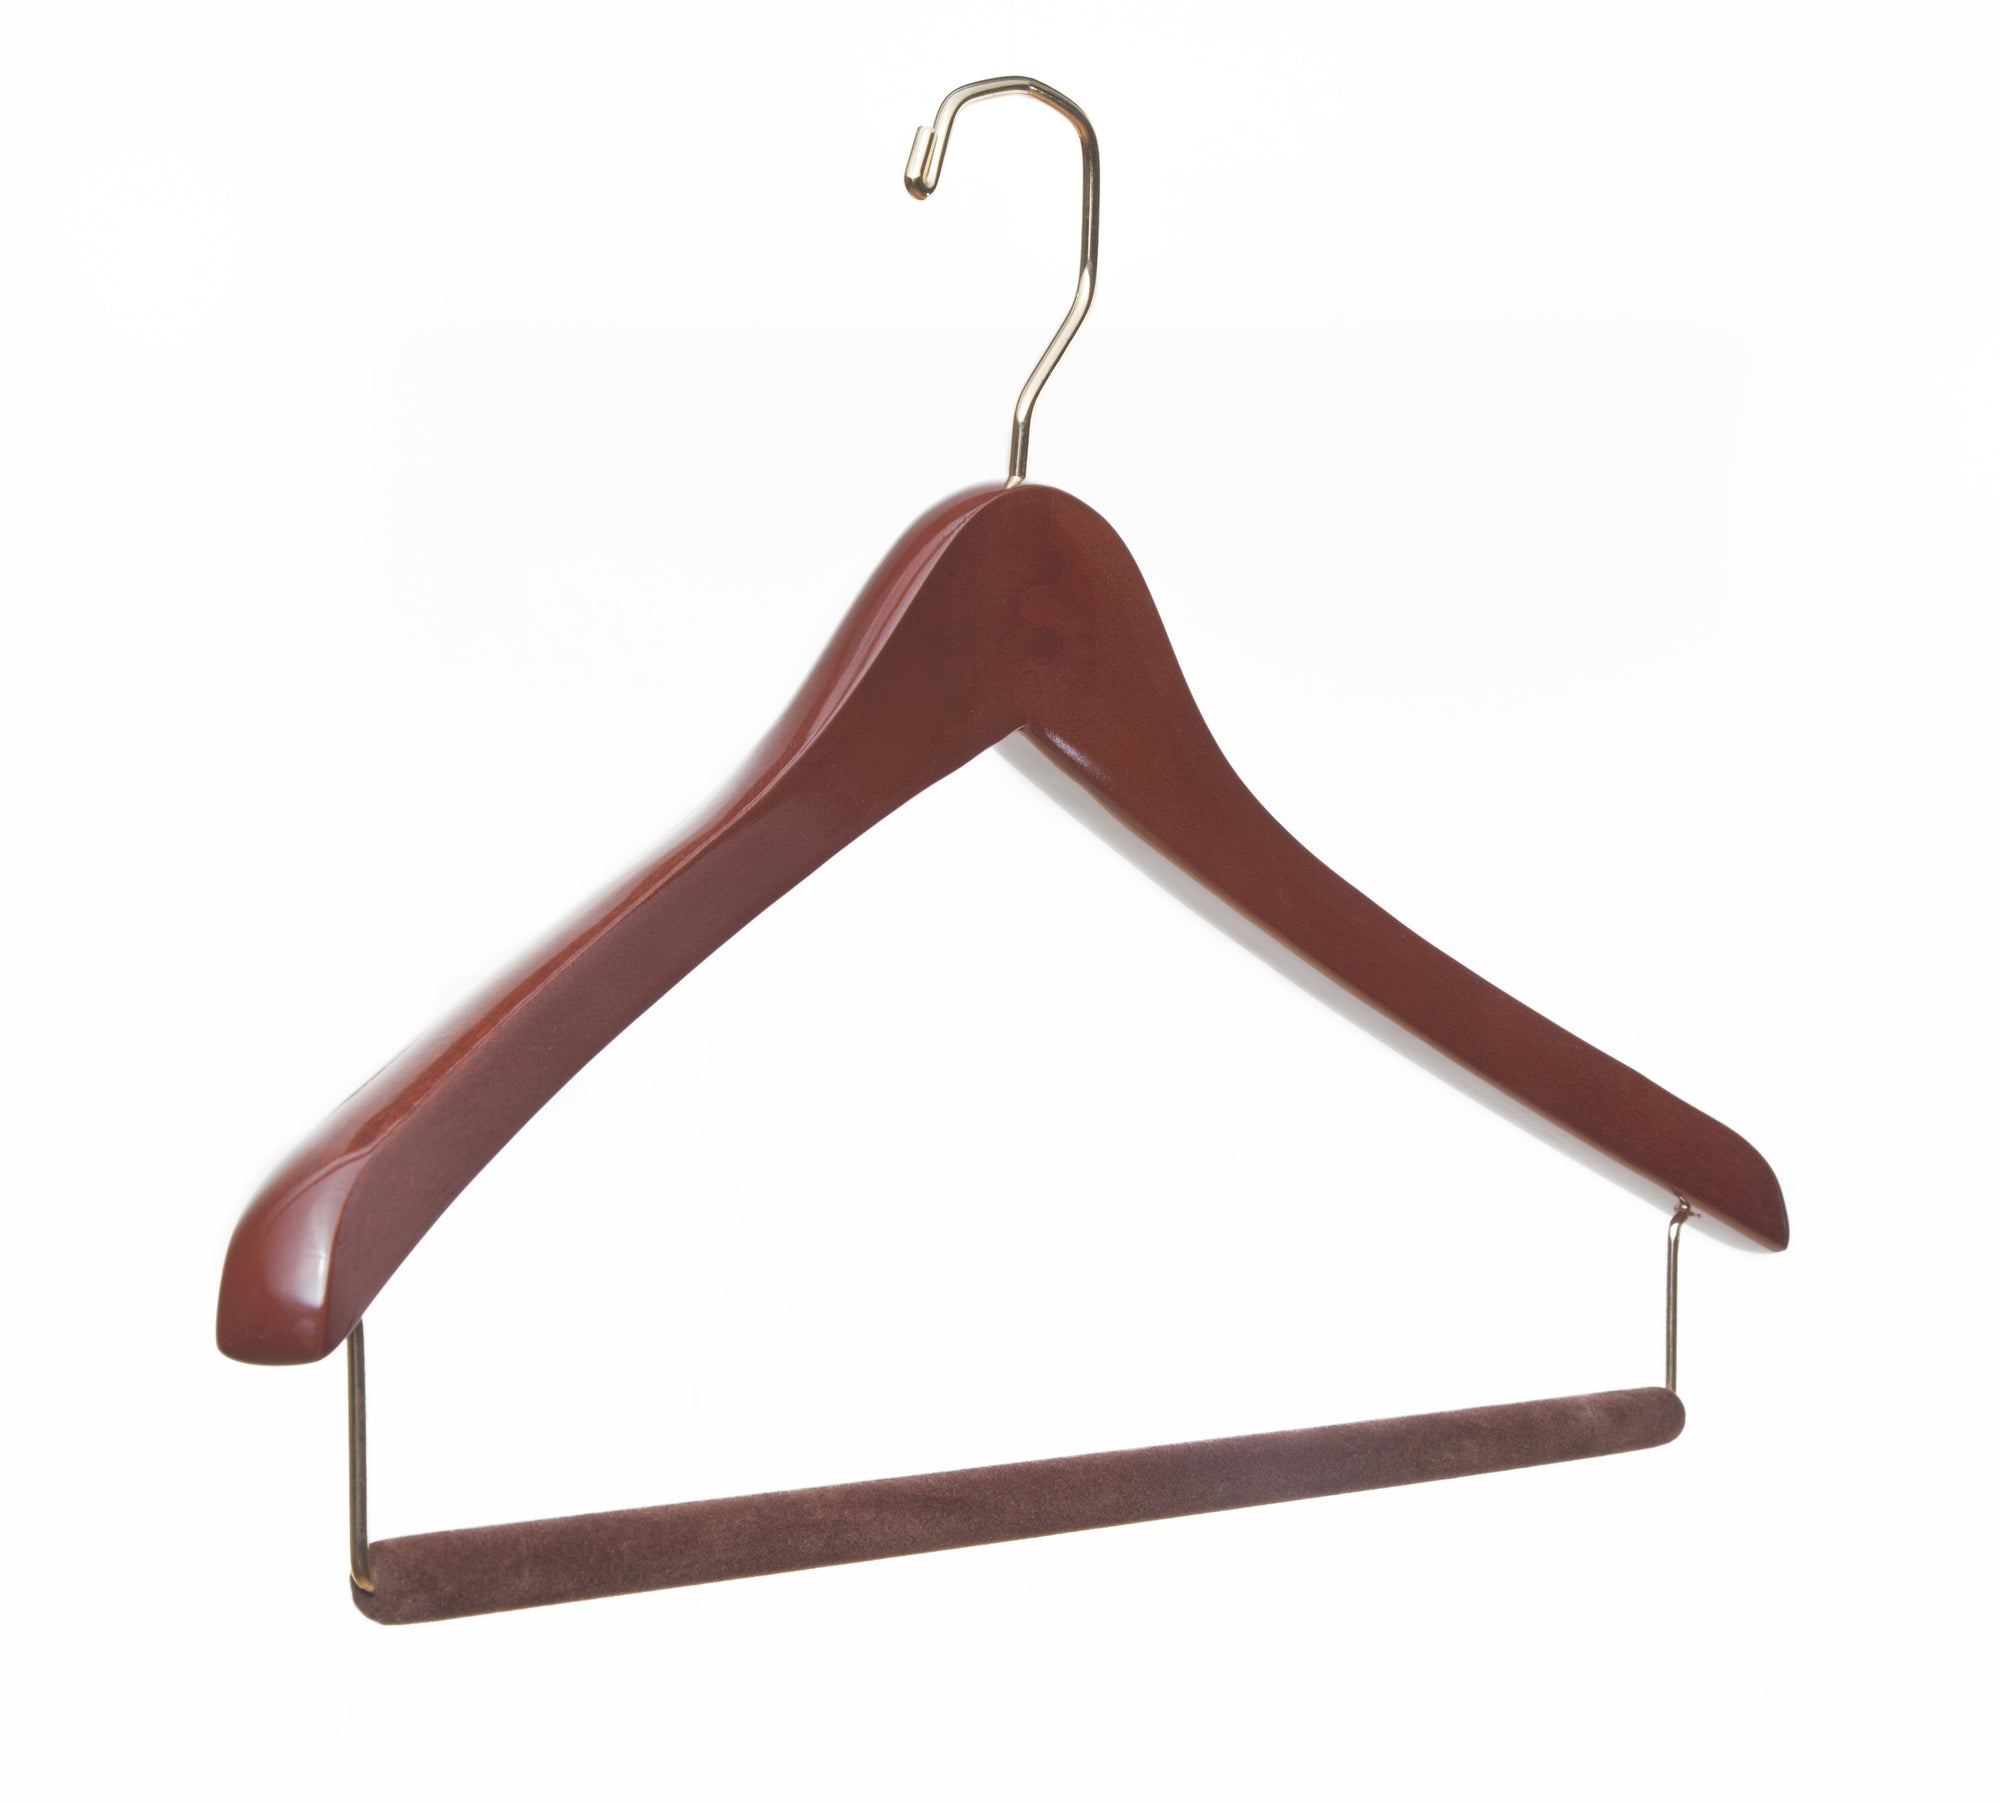 A Luxury Wooden Travel Hanger by KirbyAllison.com on a white background.